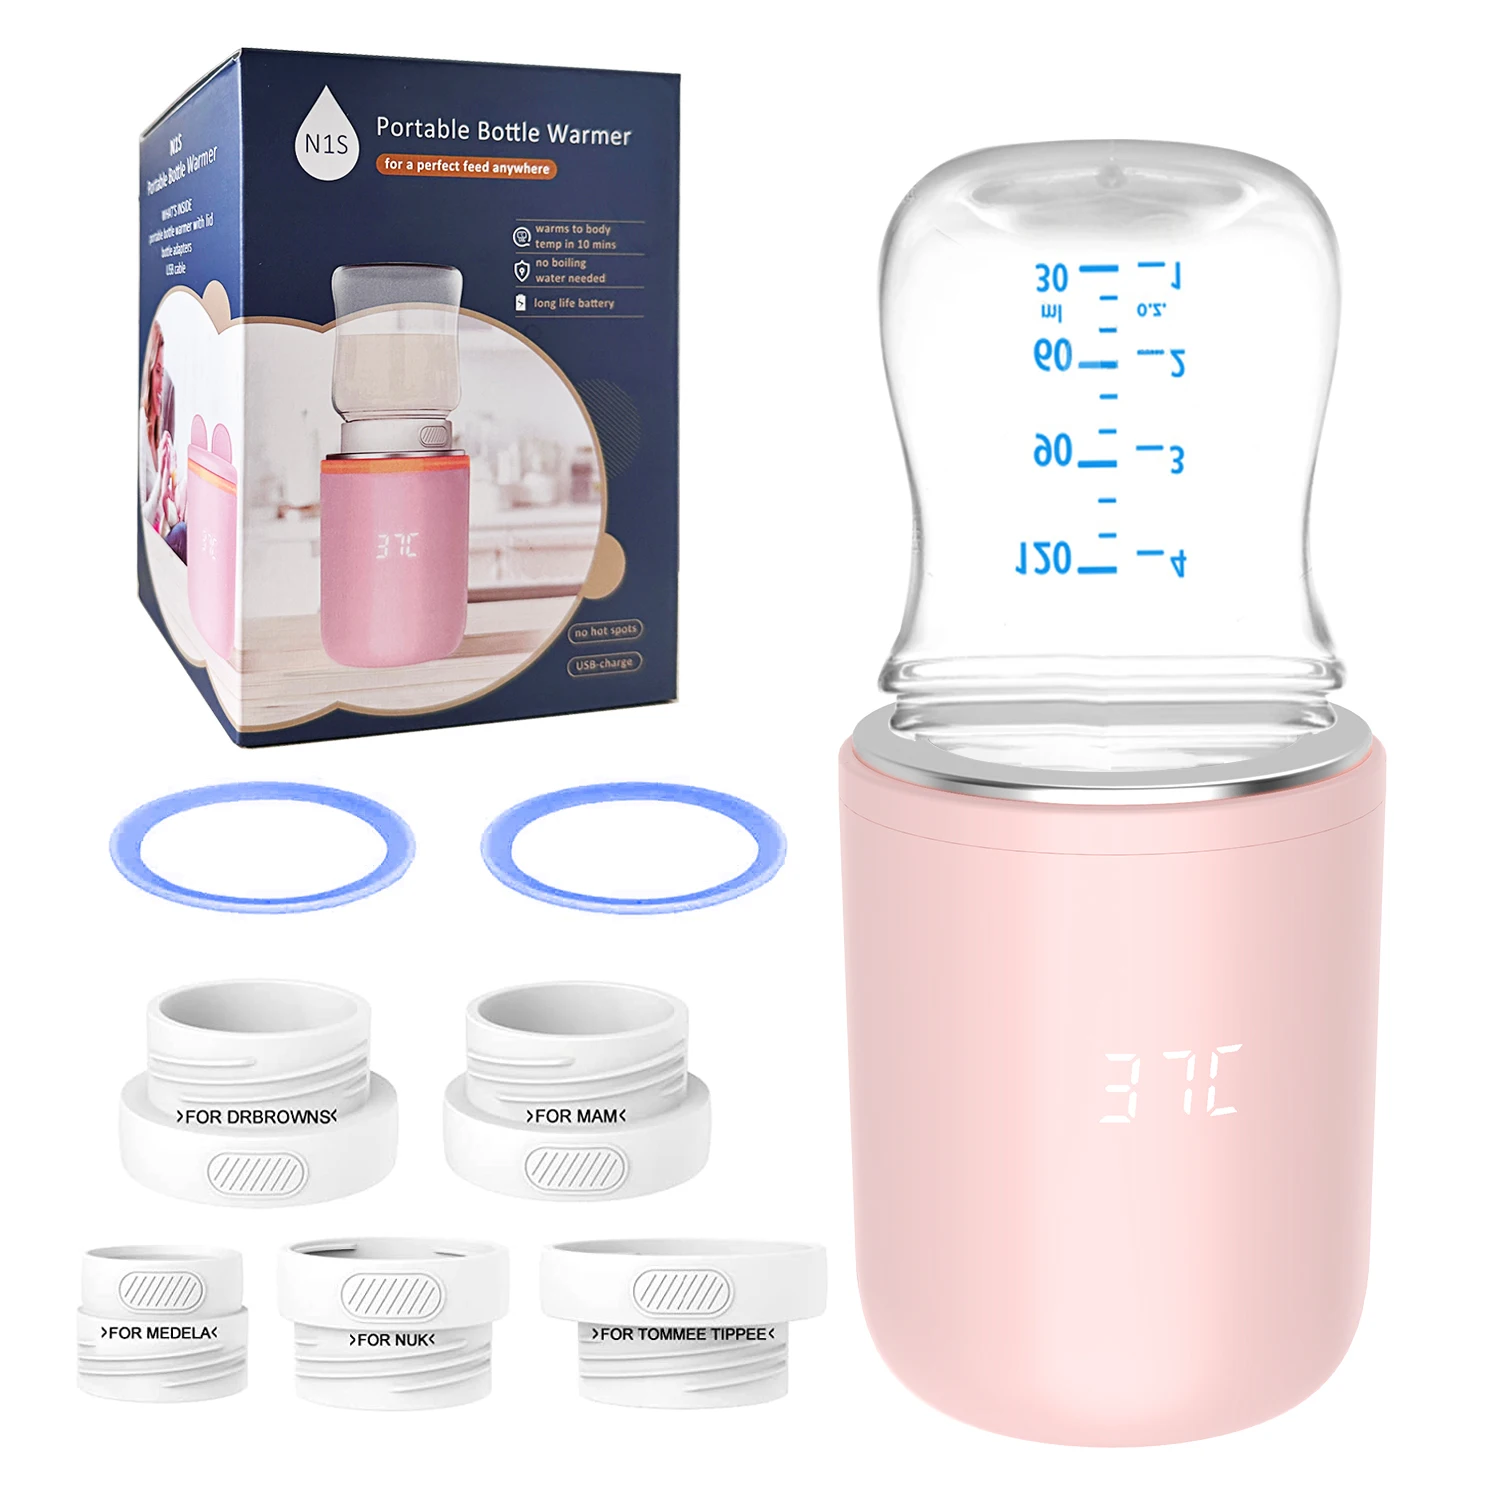 N1S Quick Heating in 3 Minutes Portable Bottle Warmer Breast Milk warmer for Most Bottles with Temperature Control, 3 Adaptors